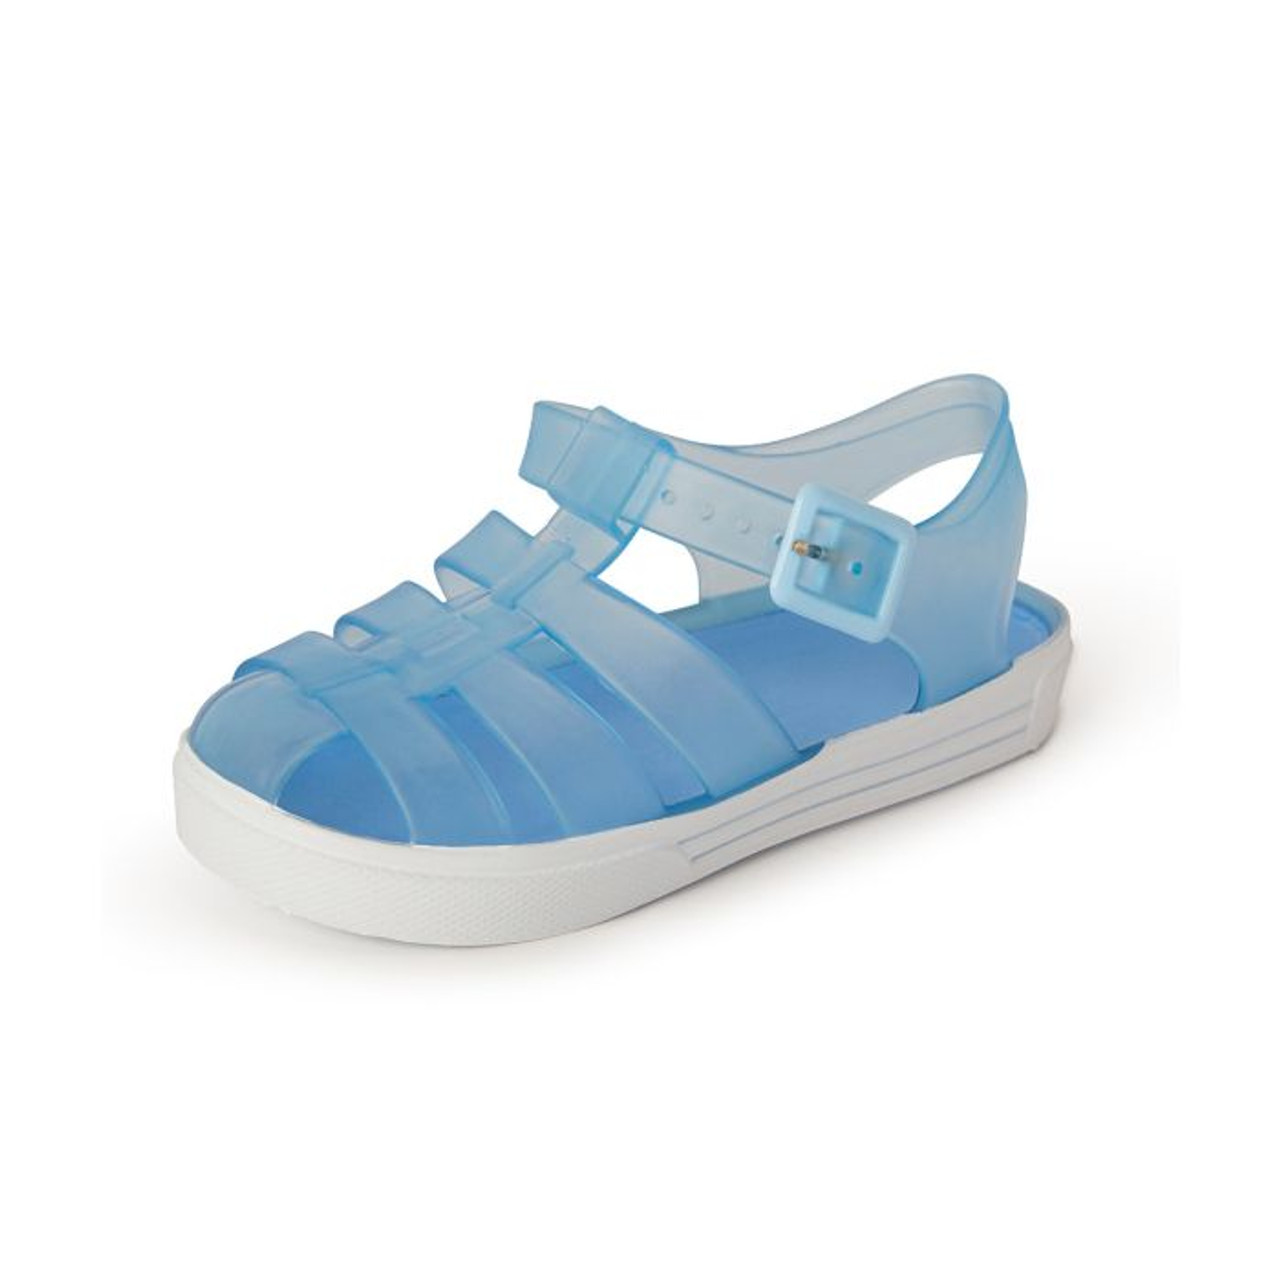 Designer Transparent Jelly Sandals For Women And Men Flat Slides With  Rubber Sole, Double G Sandal, Lace Up Closed Toe Outdoor Sandals Style 002  From Wellgstore, $57.39 | DHgate.Com